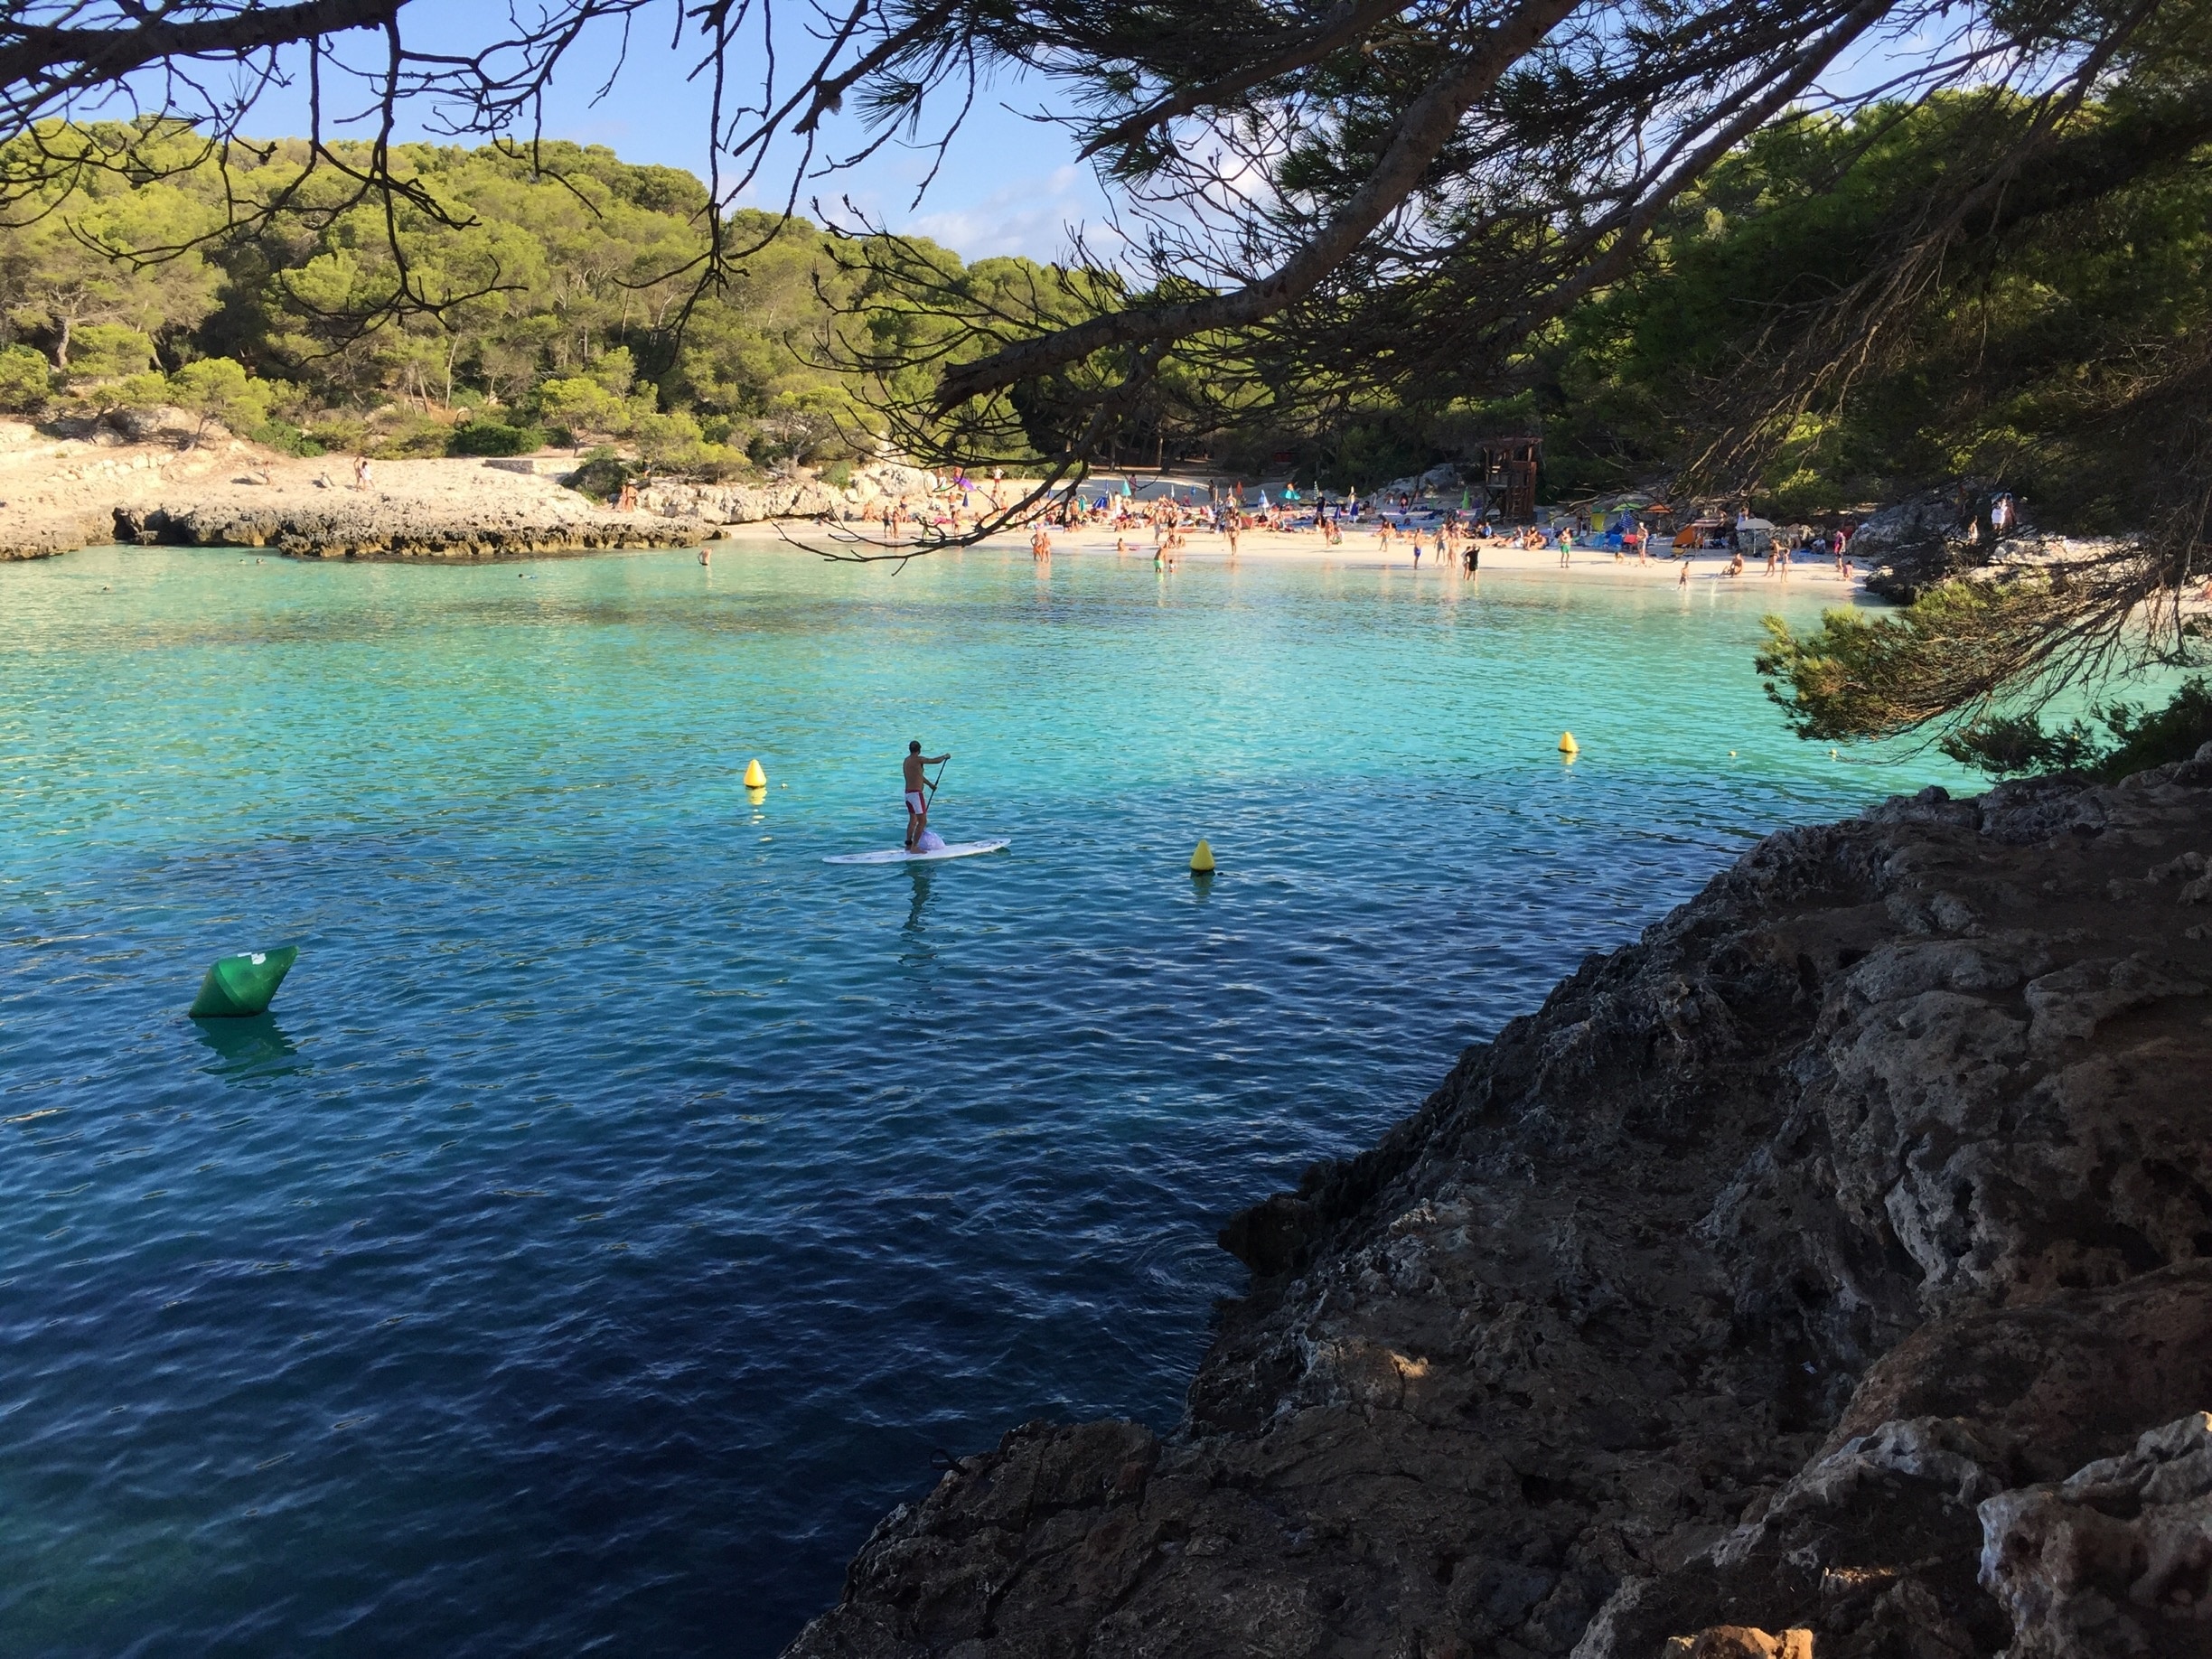 Such a beautiful beach in Menorca. Well worth the 30 min hike to reach 